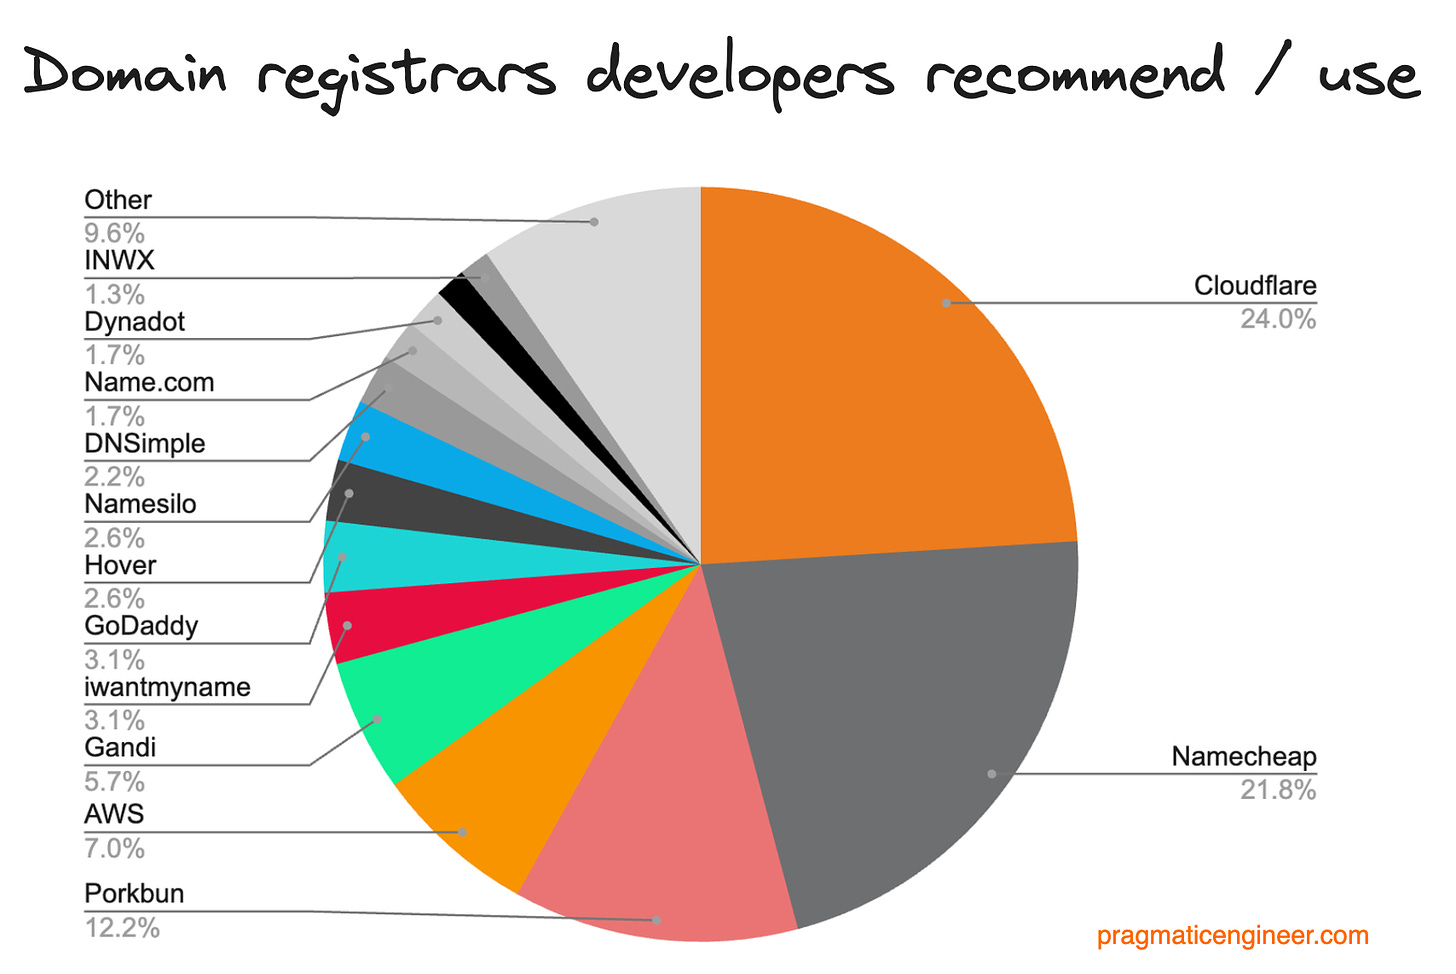 “What domain registrars would you recommend / do you use?” How 251 techies responded. Question asked on Twitter